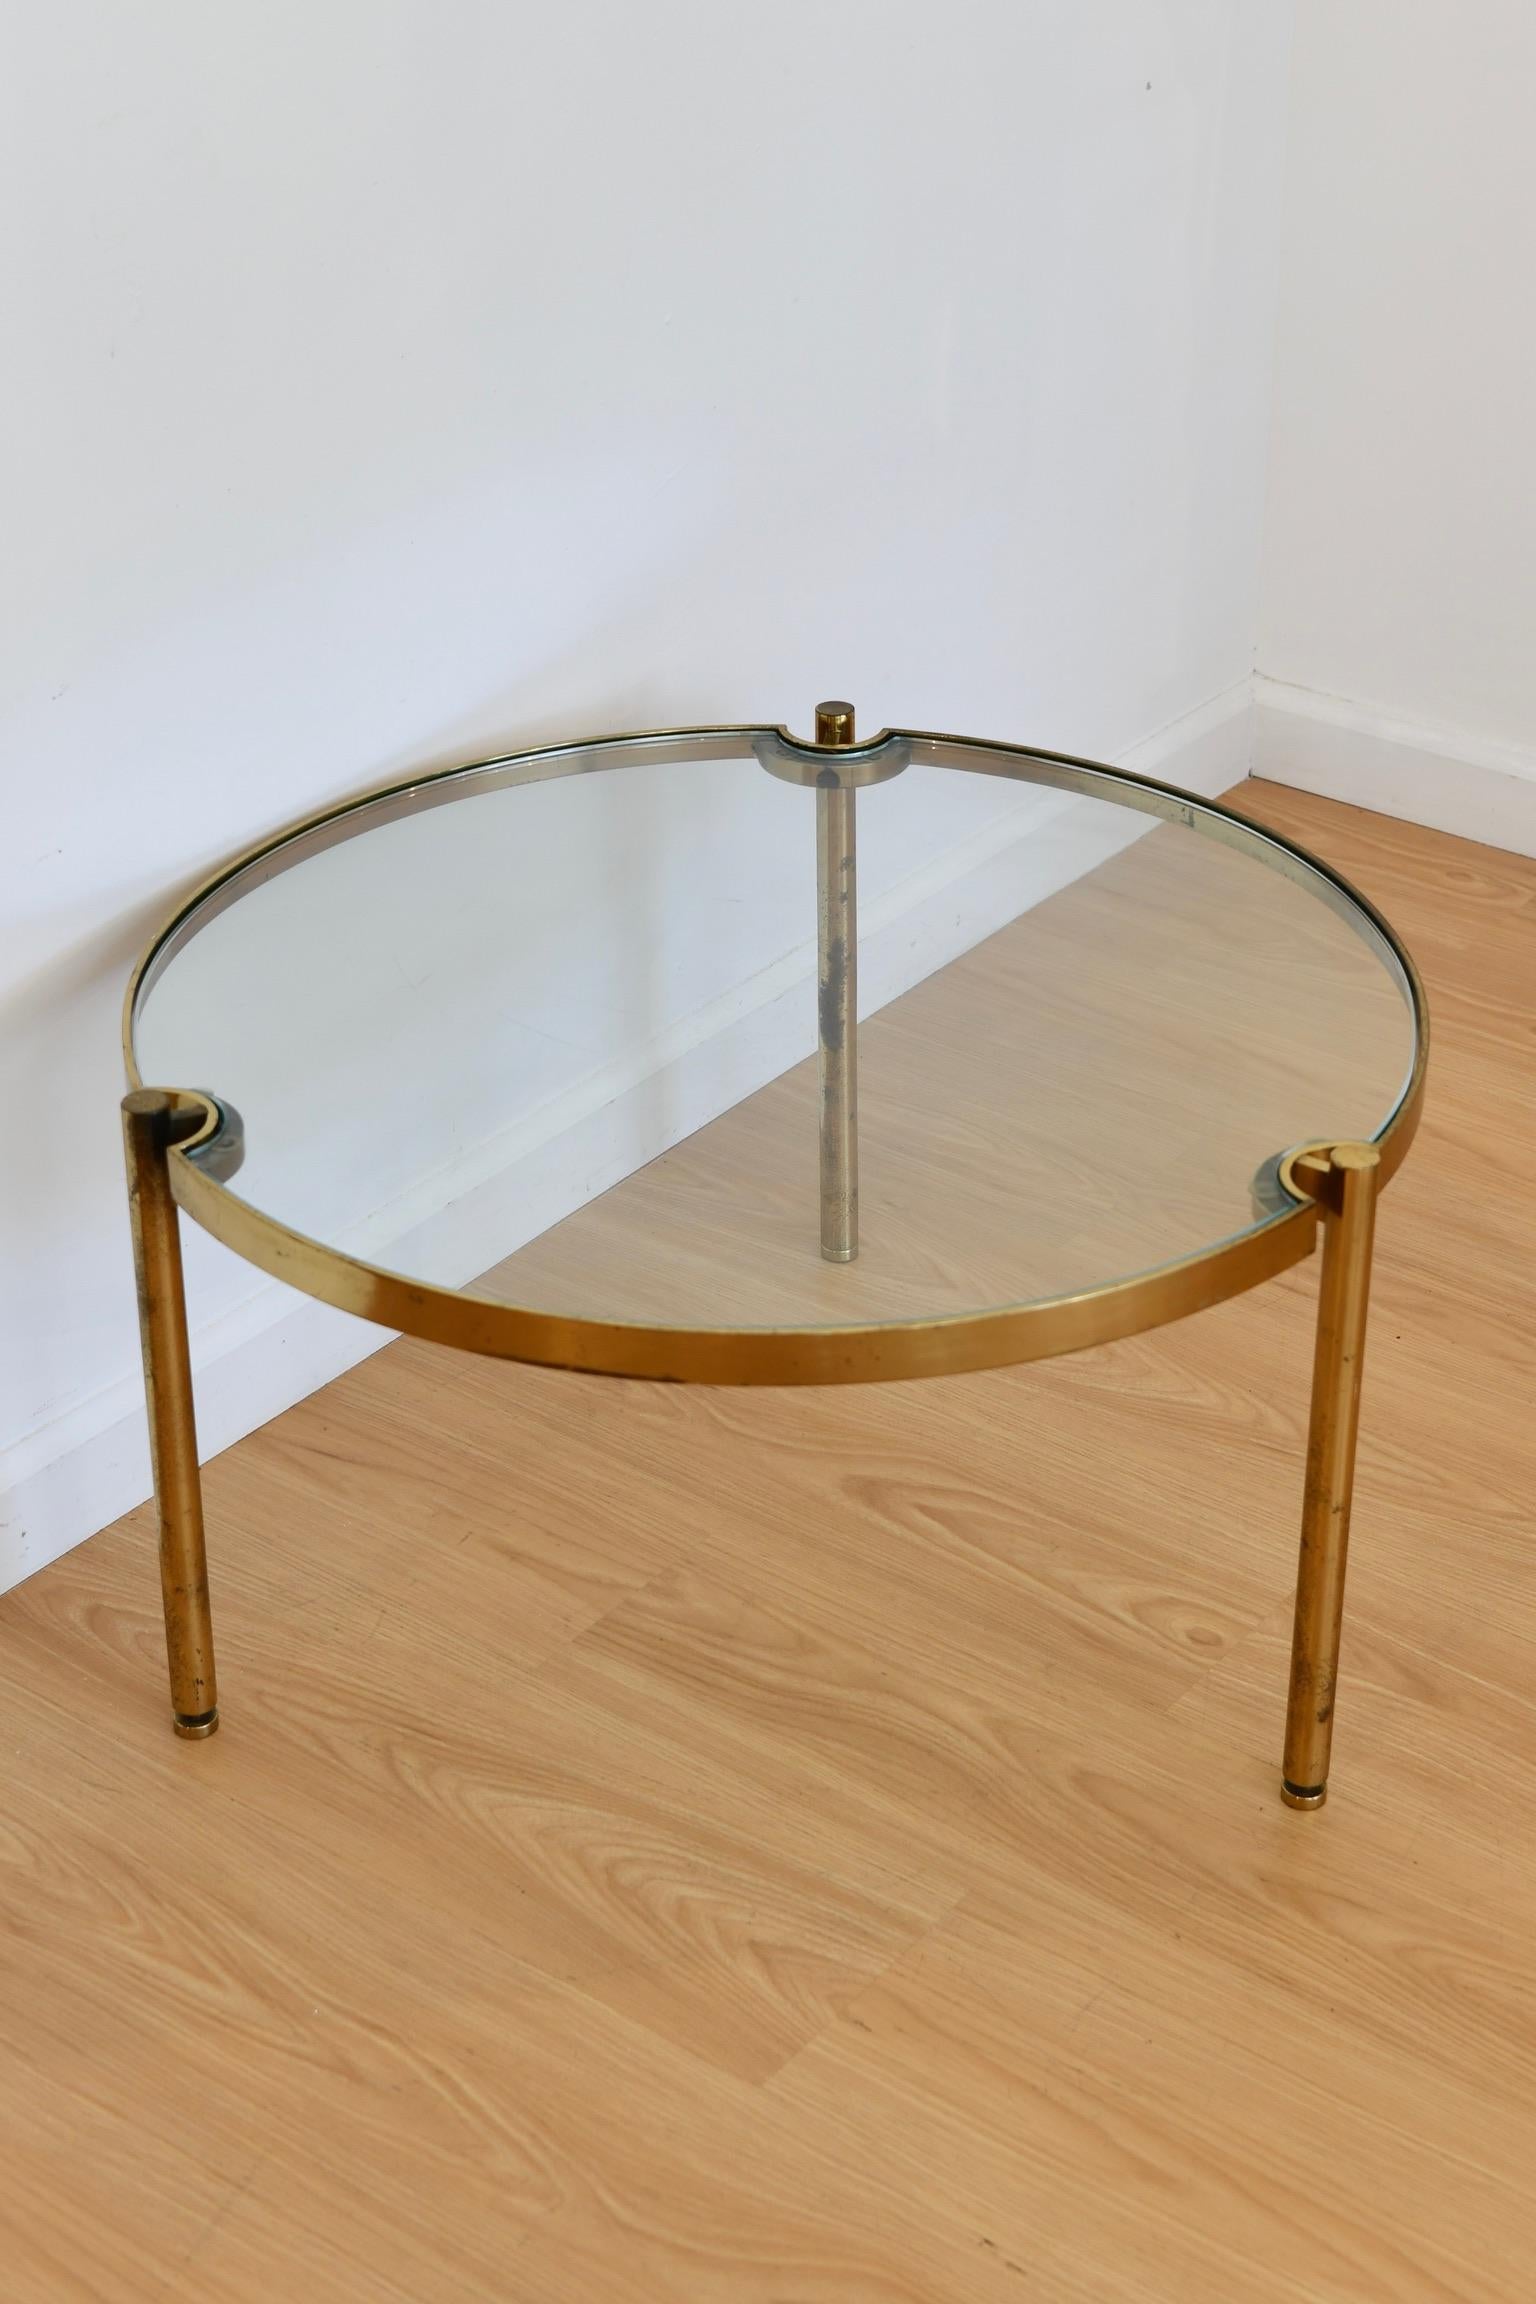 20th Century Midcentury Round Brass Coffee Table For Sale